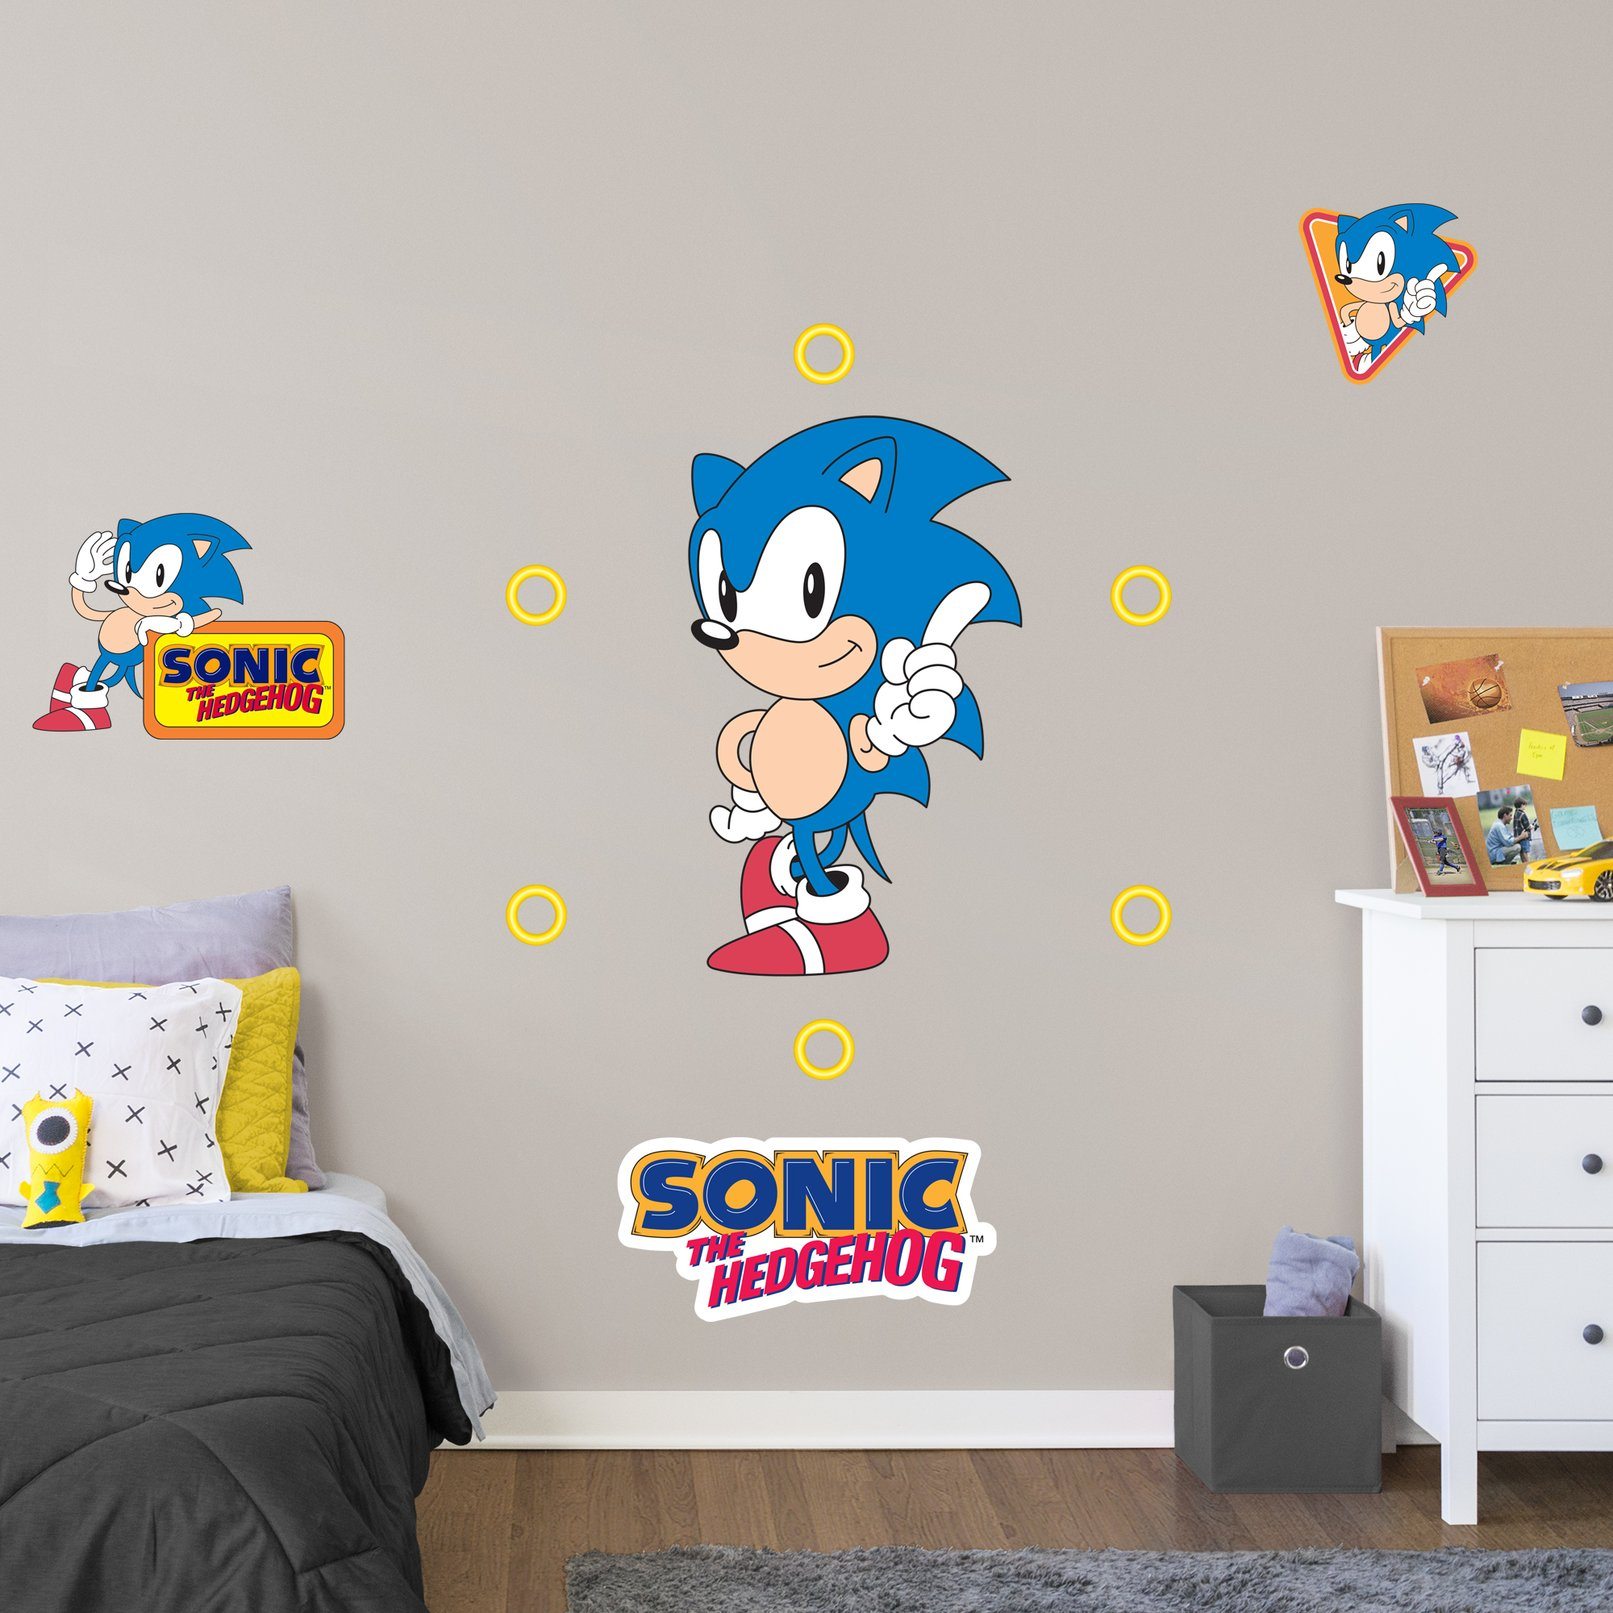 https://fathead.com/collections/flash-sale/products/m1900-01629-003?variant=33578620584024